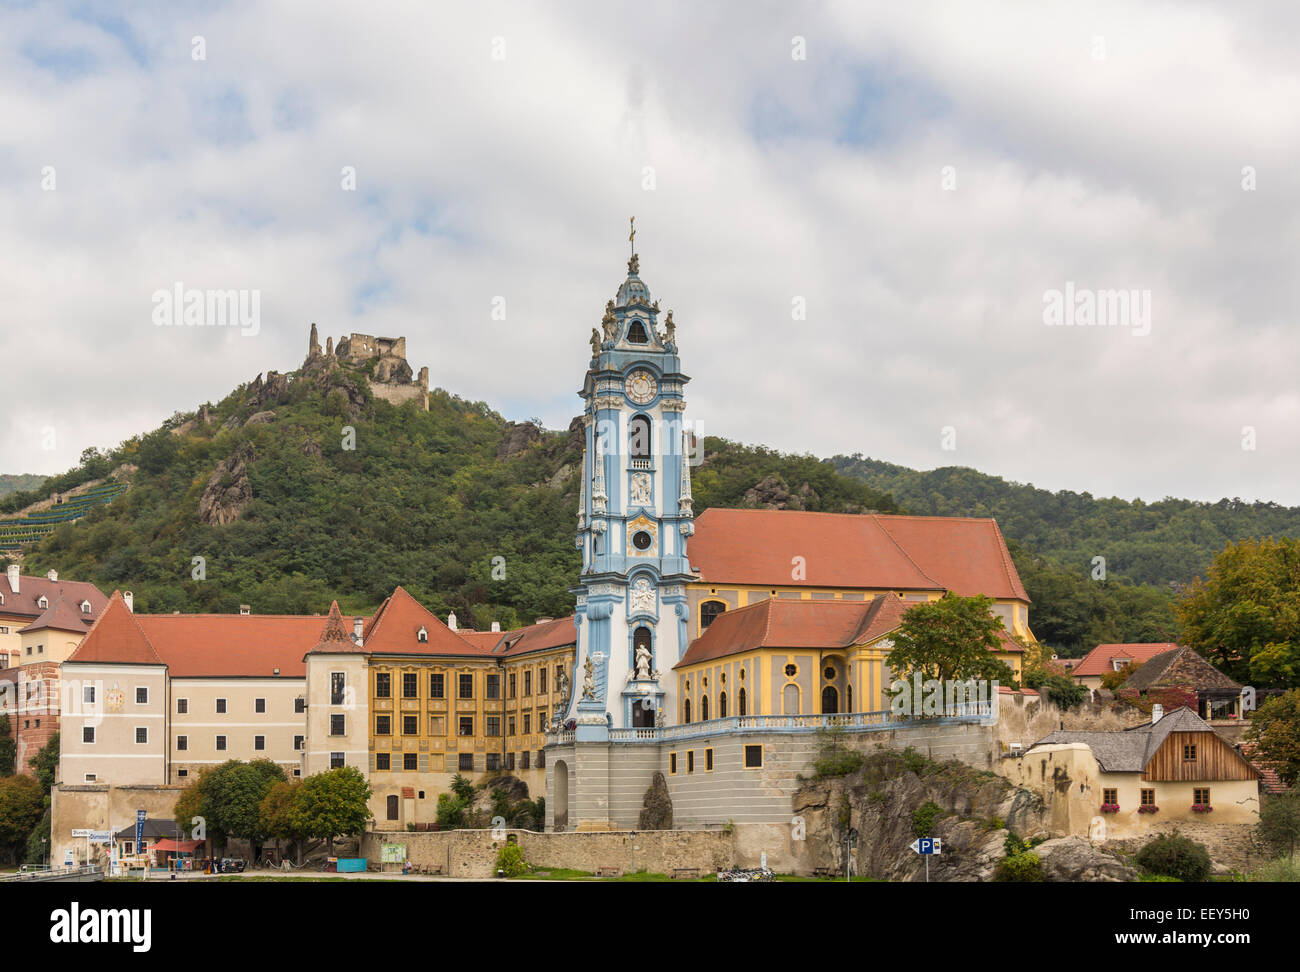 Durnstein, Austria - ornate church, castle and buildings on banks of River Danube Stock Photo